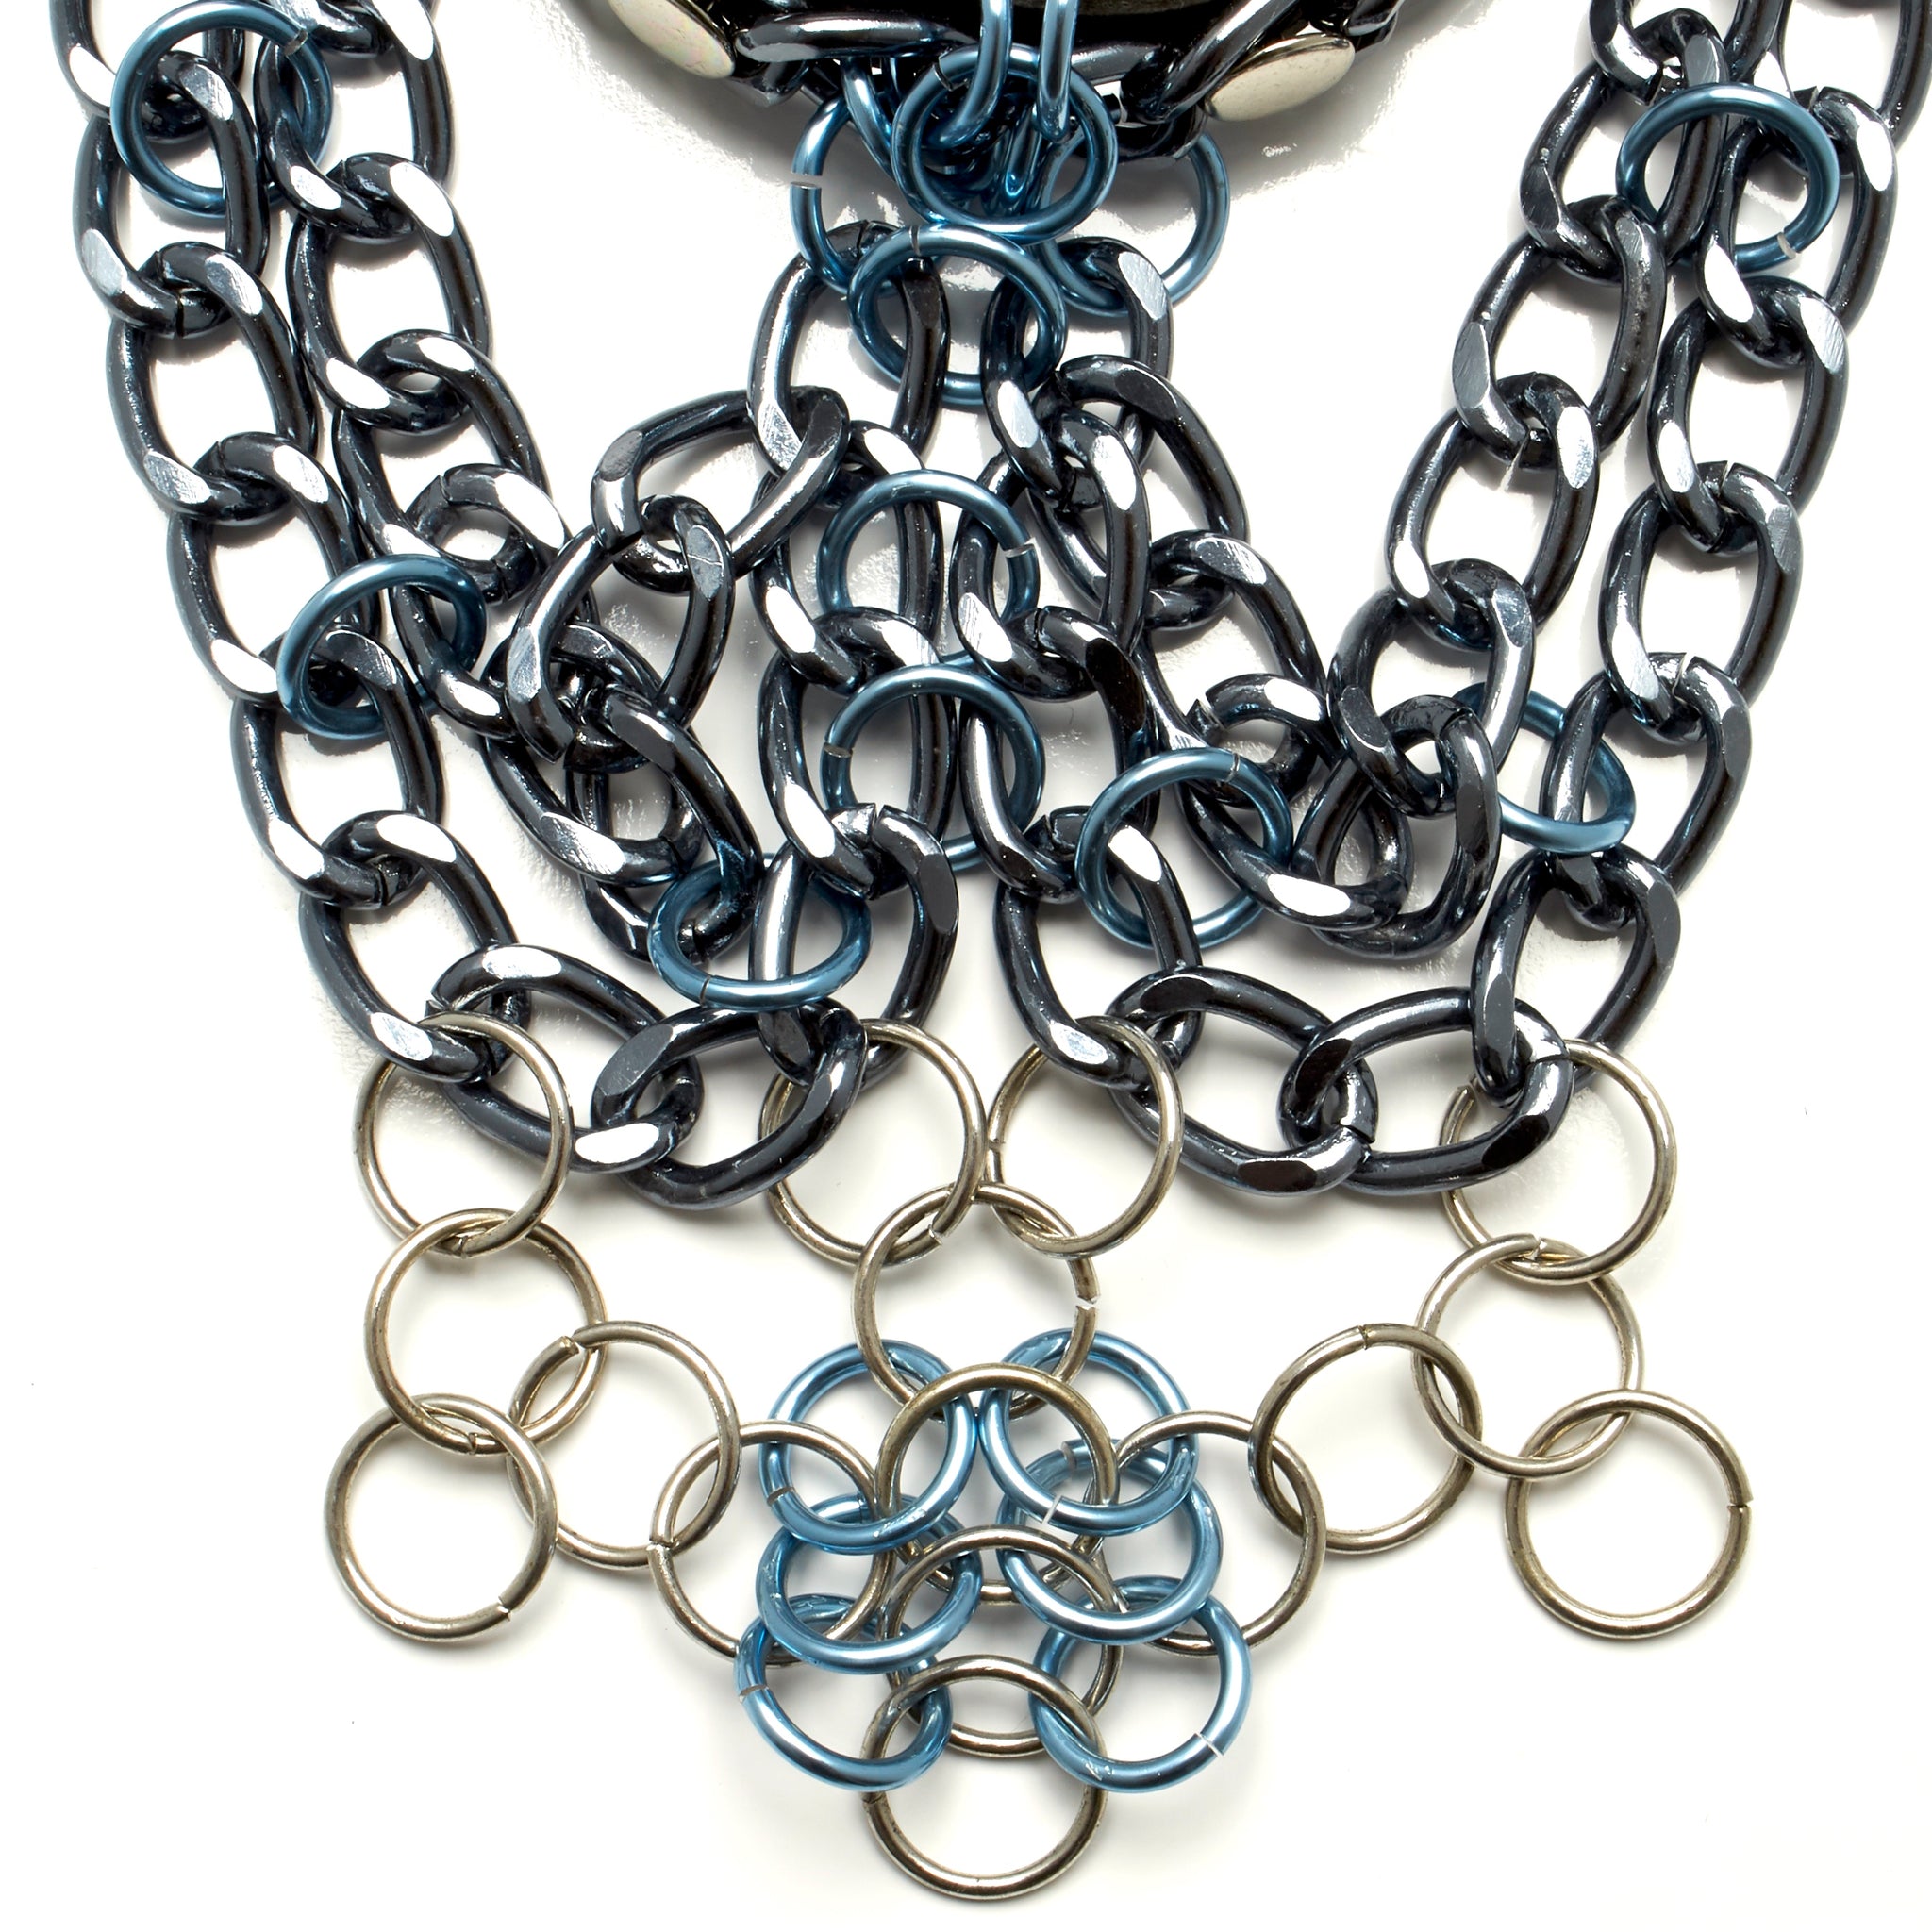 BLACK COWHIDE CHOKER NECKLACE WITH CLUSTER OF CHAINS AND CHAINMAILLE WORK. by nyet jewelry